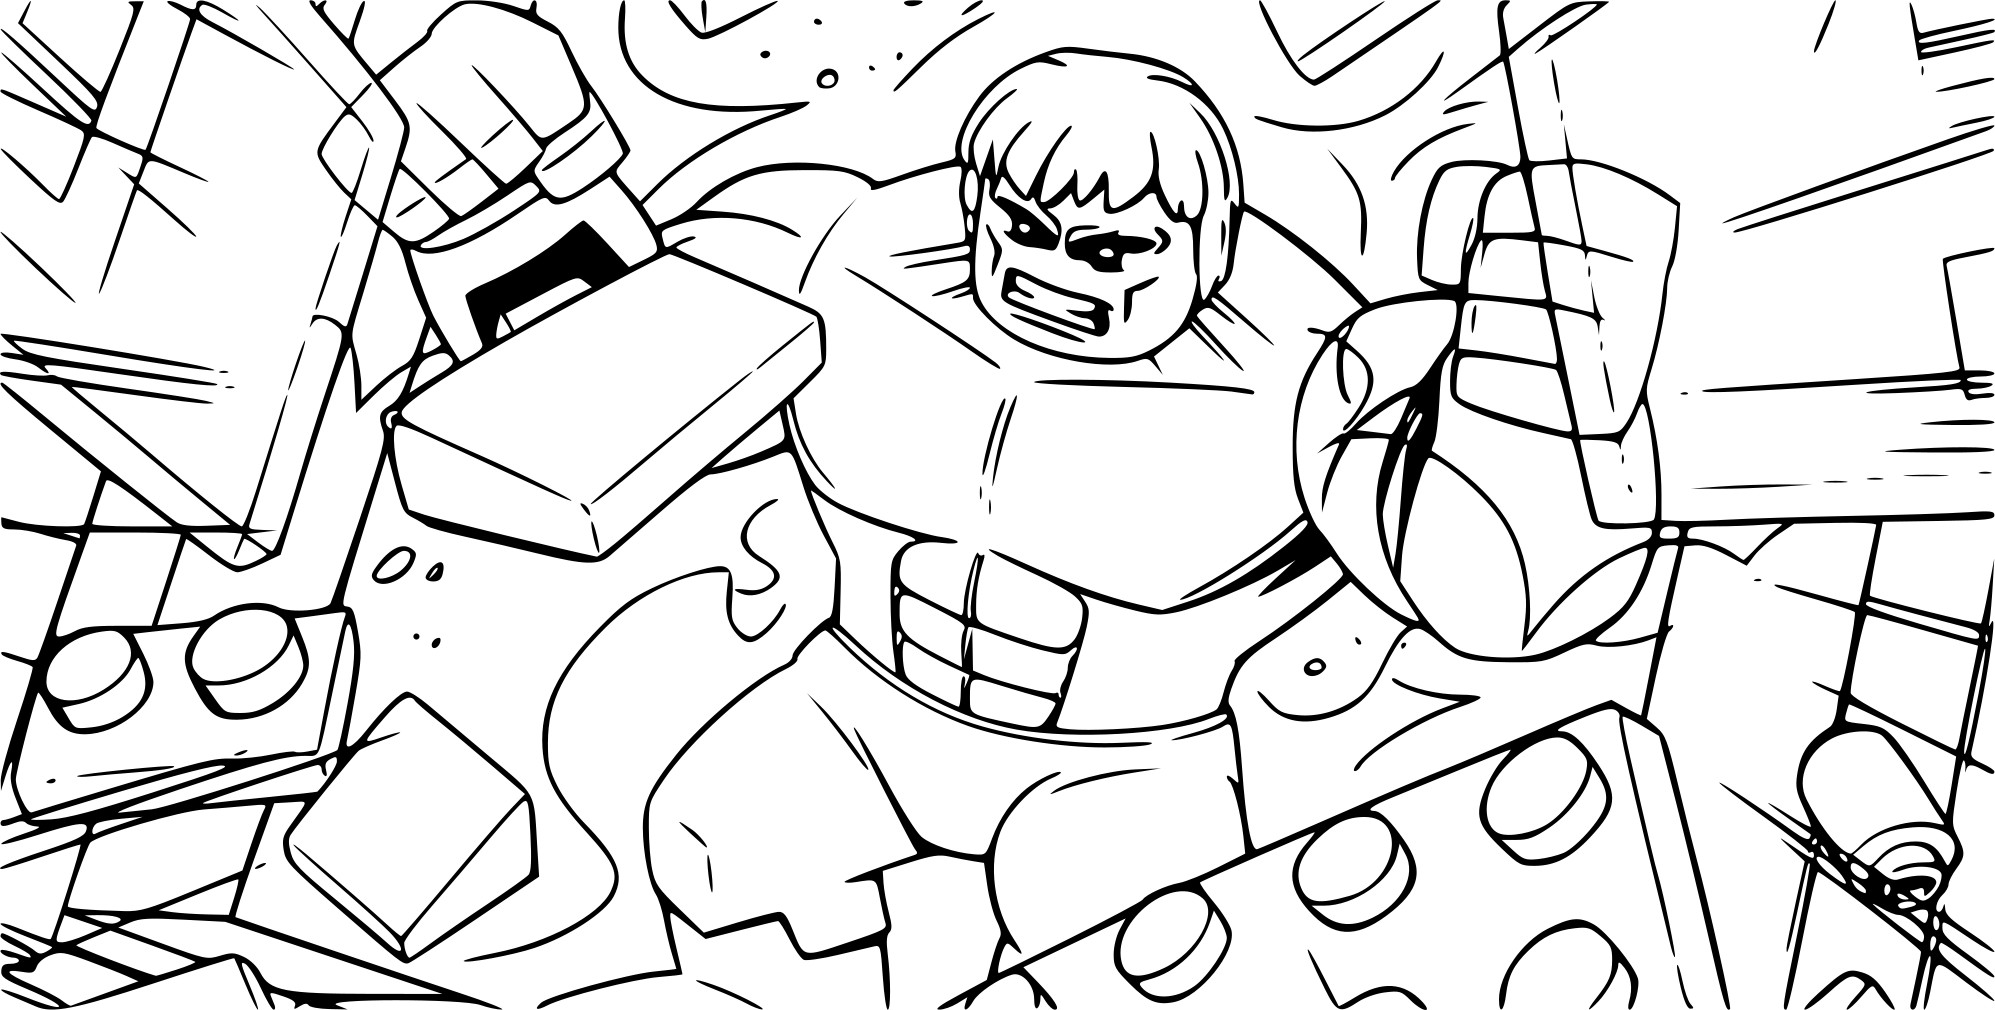 Avengers Lego coloring page